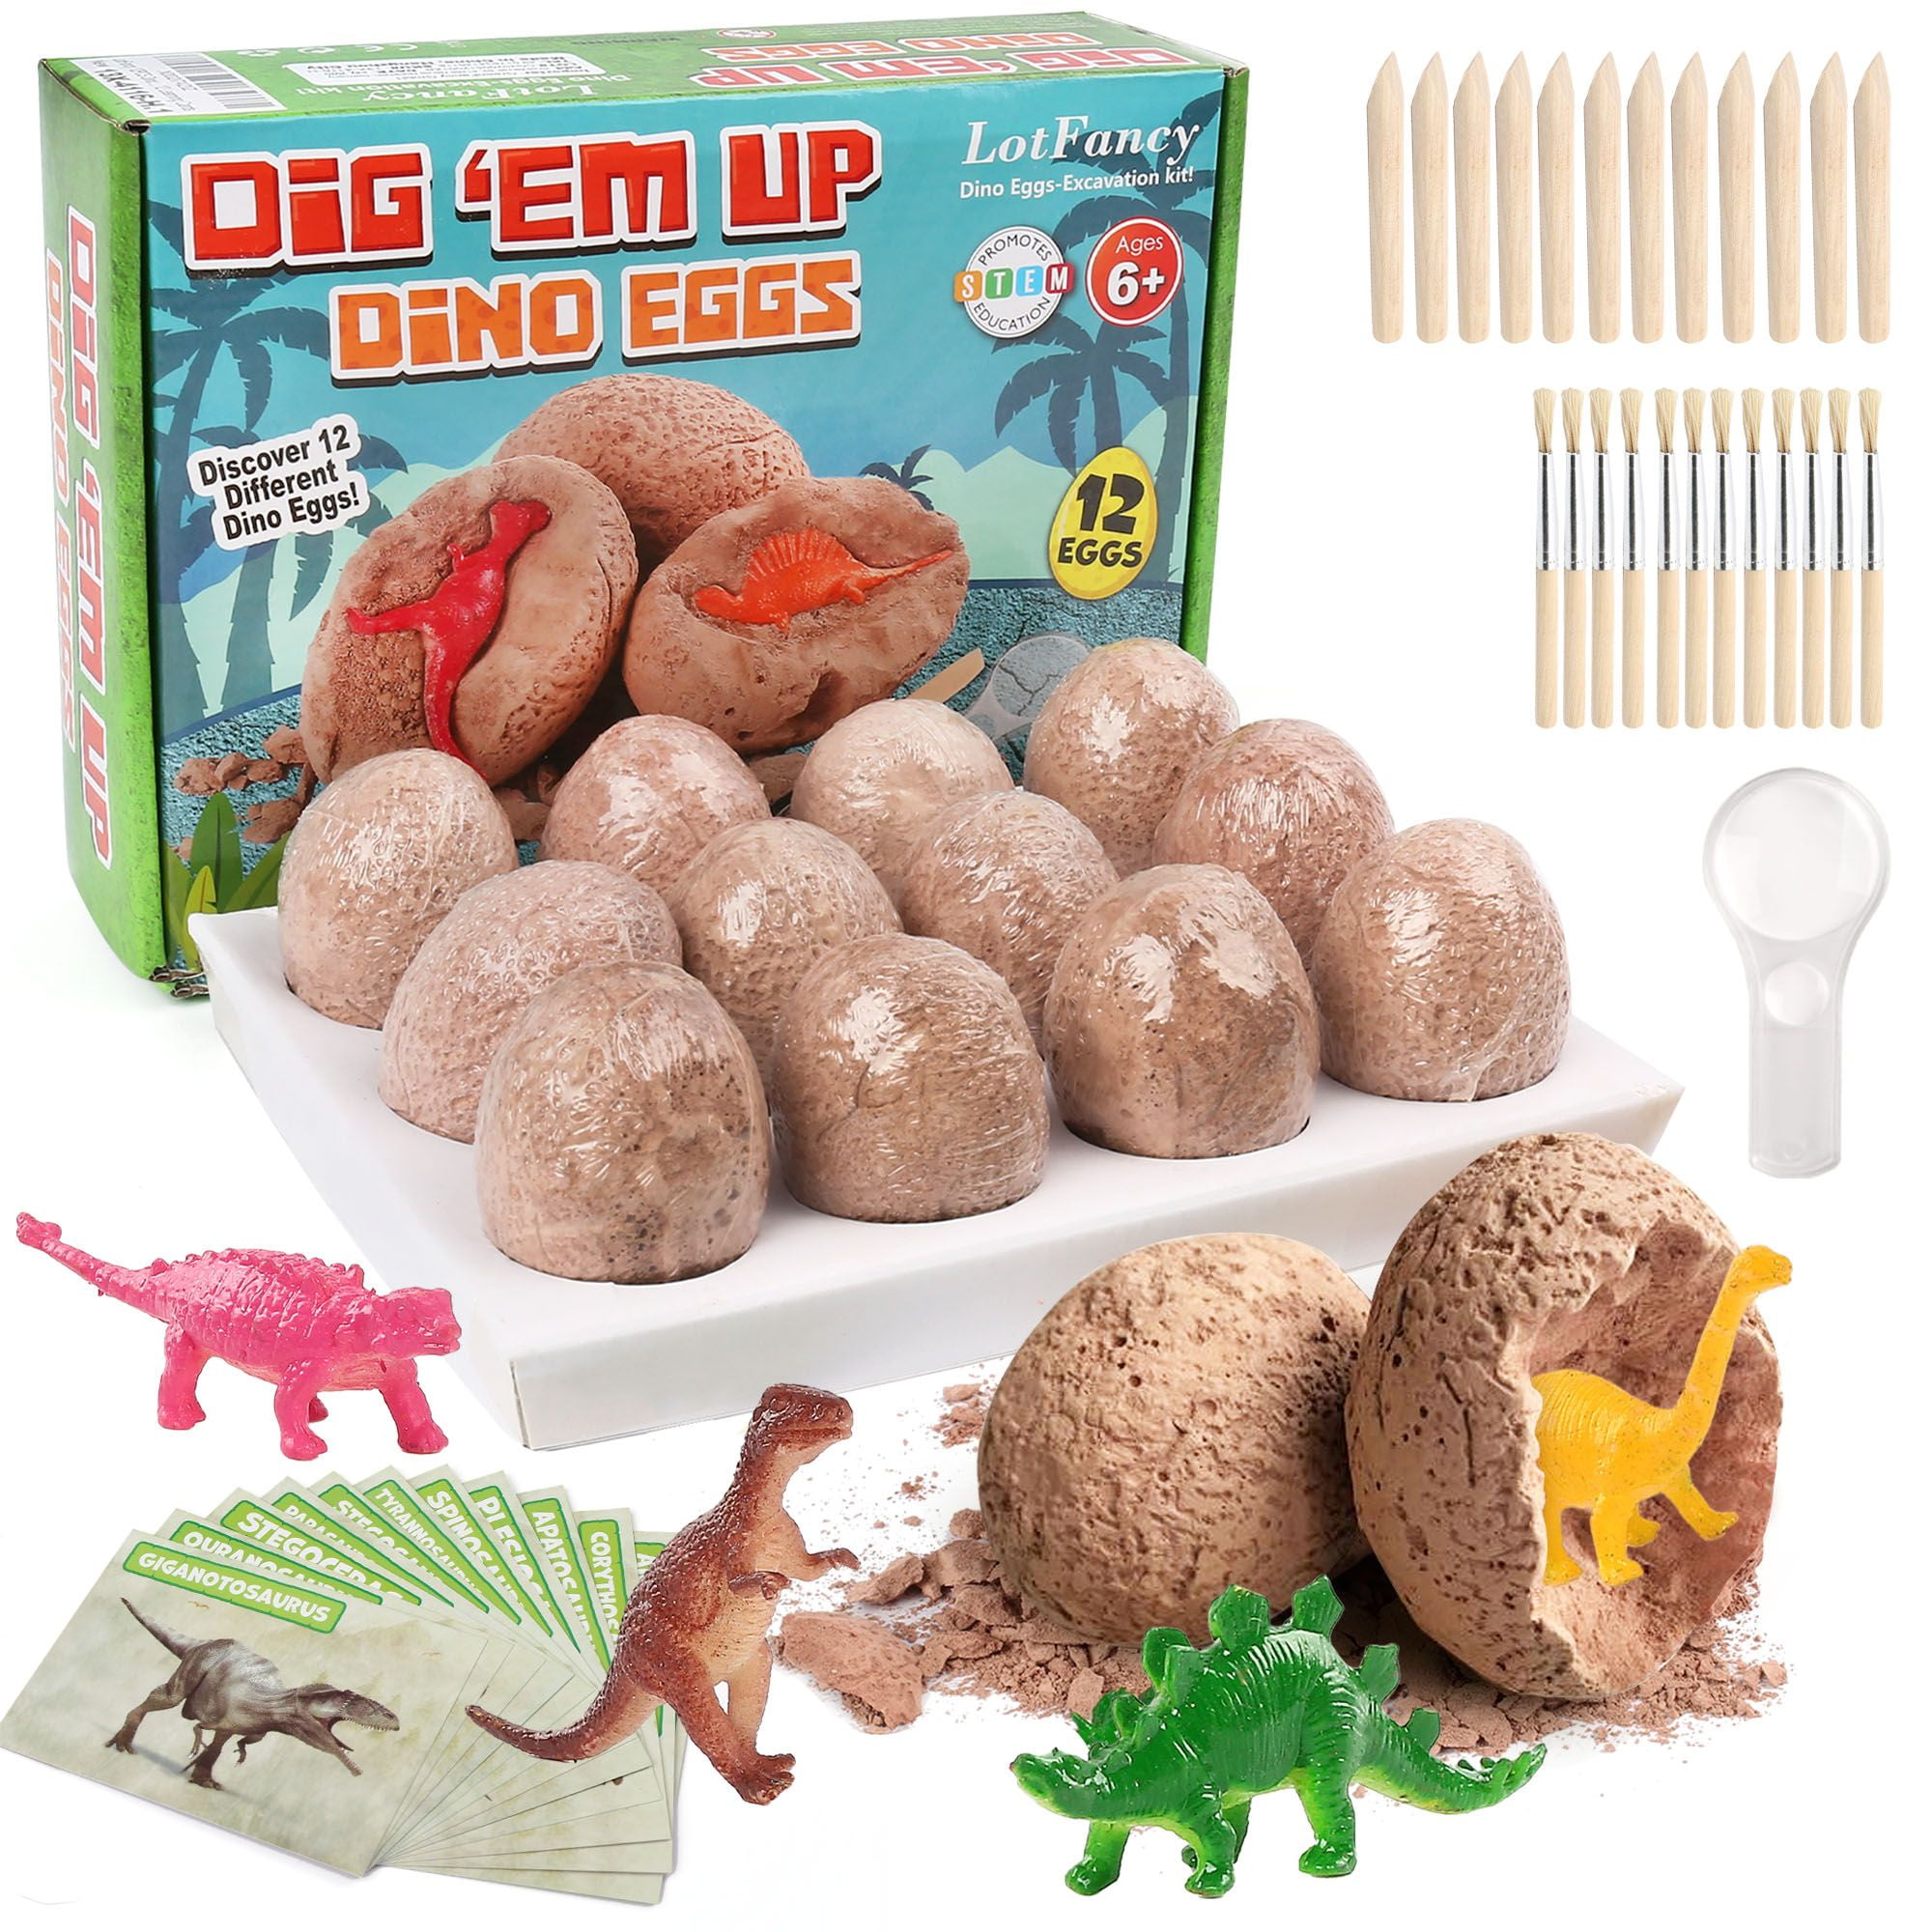 LotFancy 12 Dinosaurs Eggs Dig Kit Toy for Kids 6+